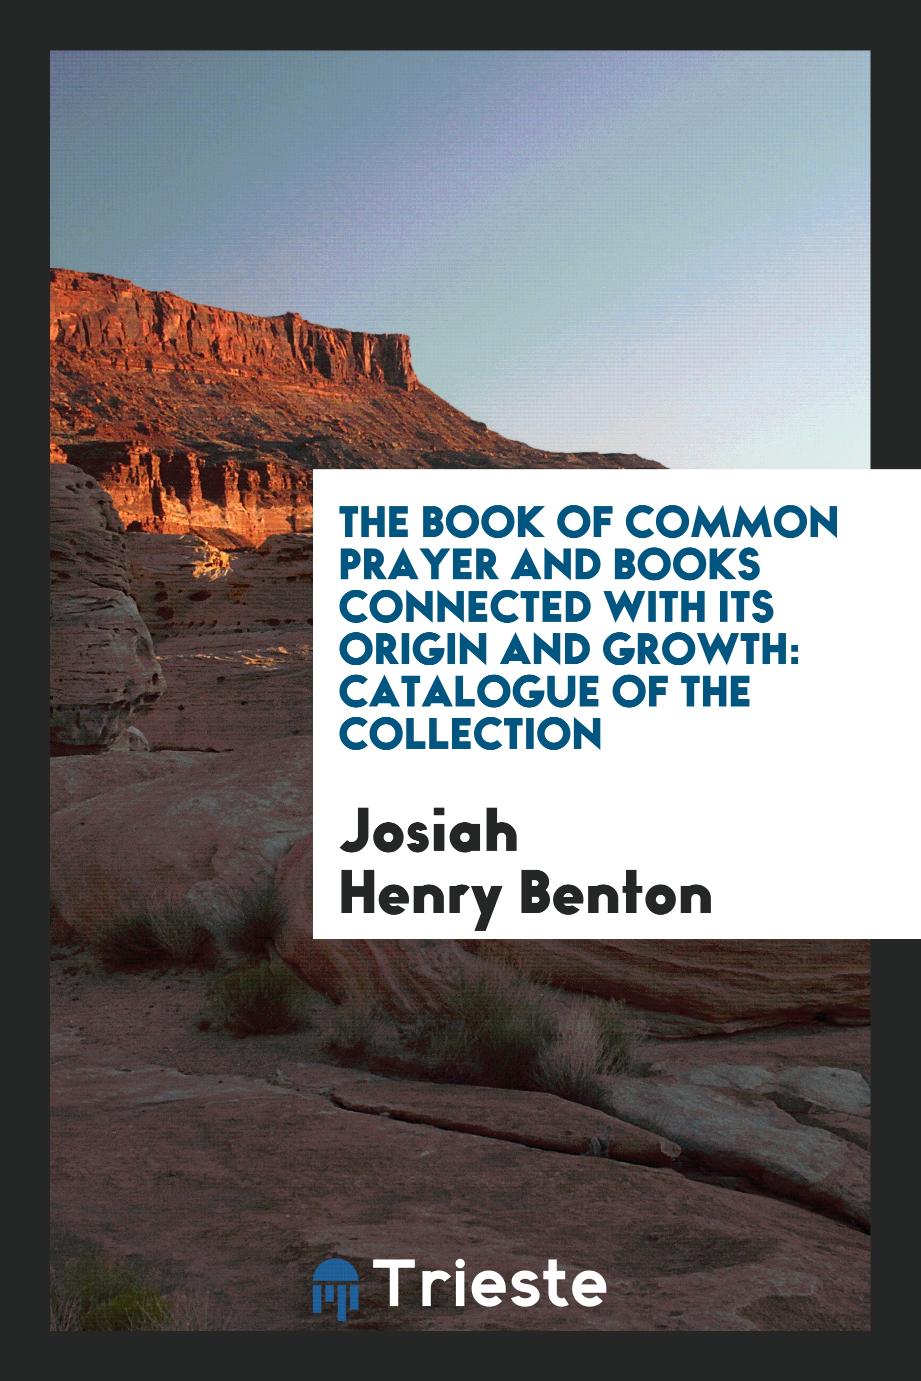 The Book of Common Prayer and Books Connected with Its Origin and Growth: Catalogue of the Collection